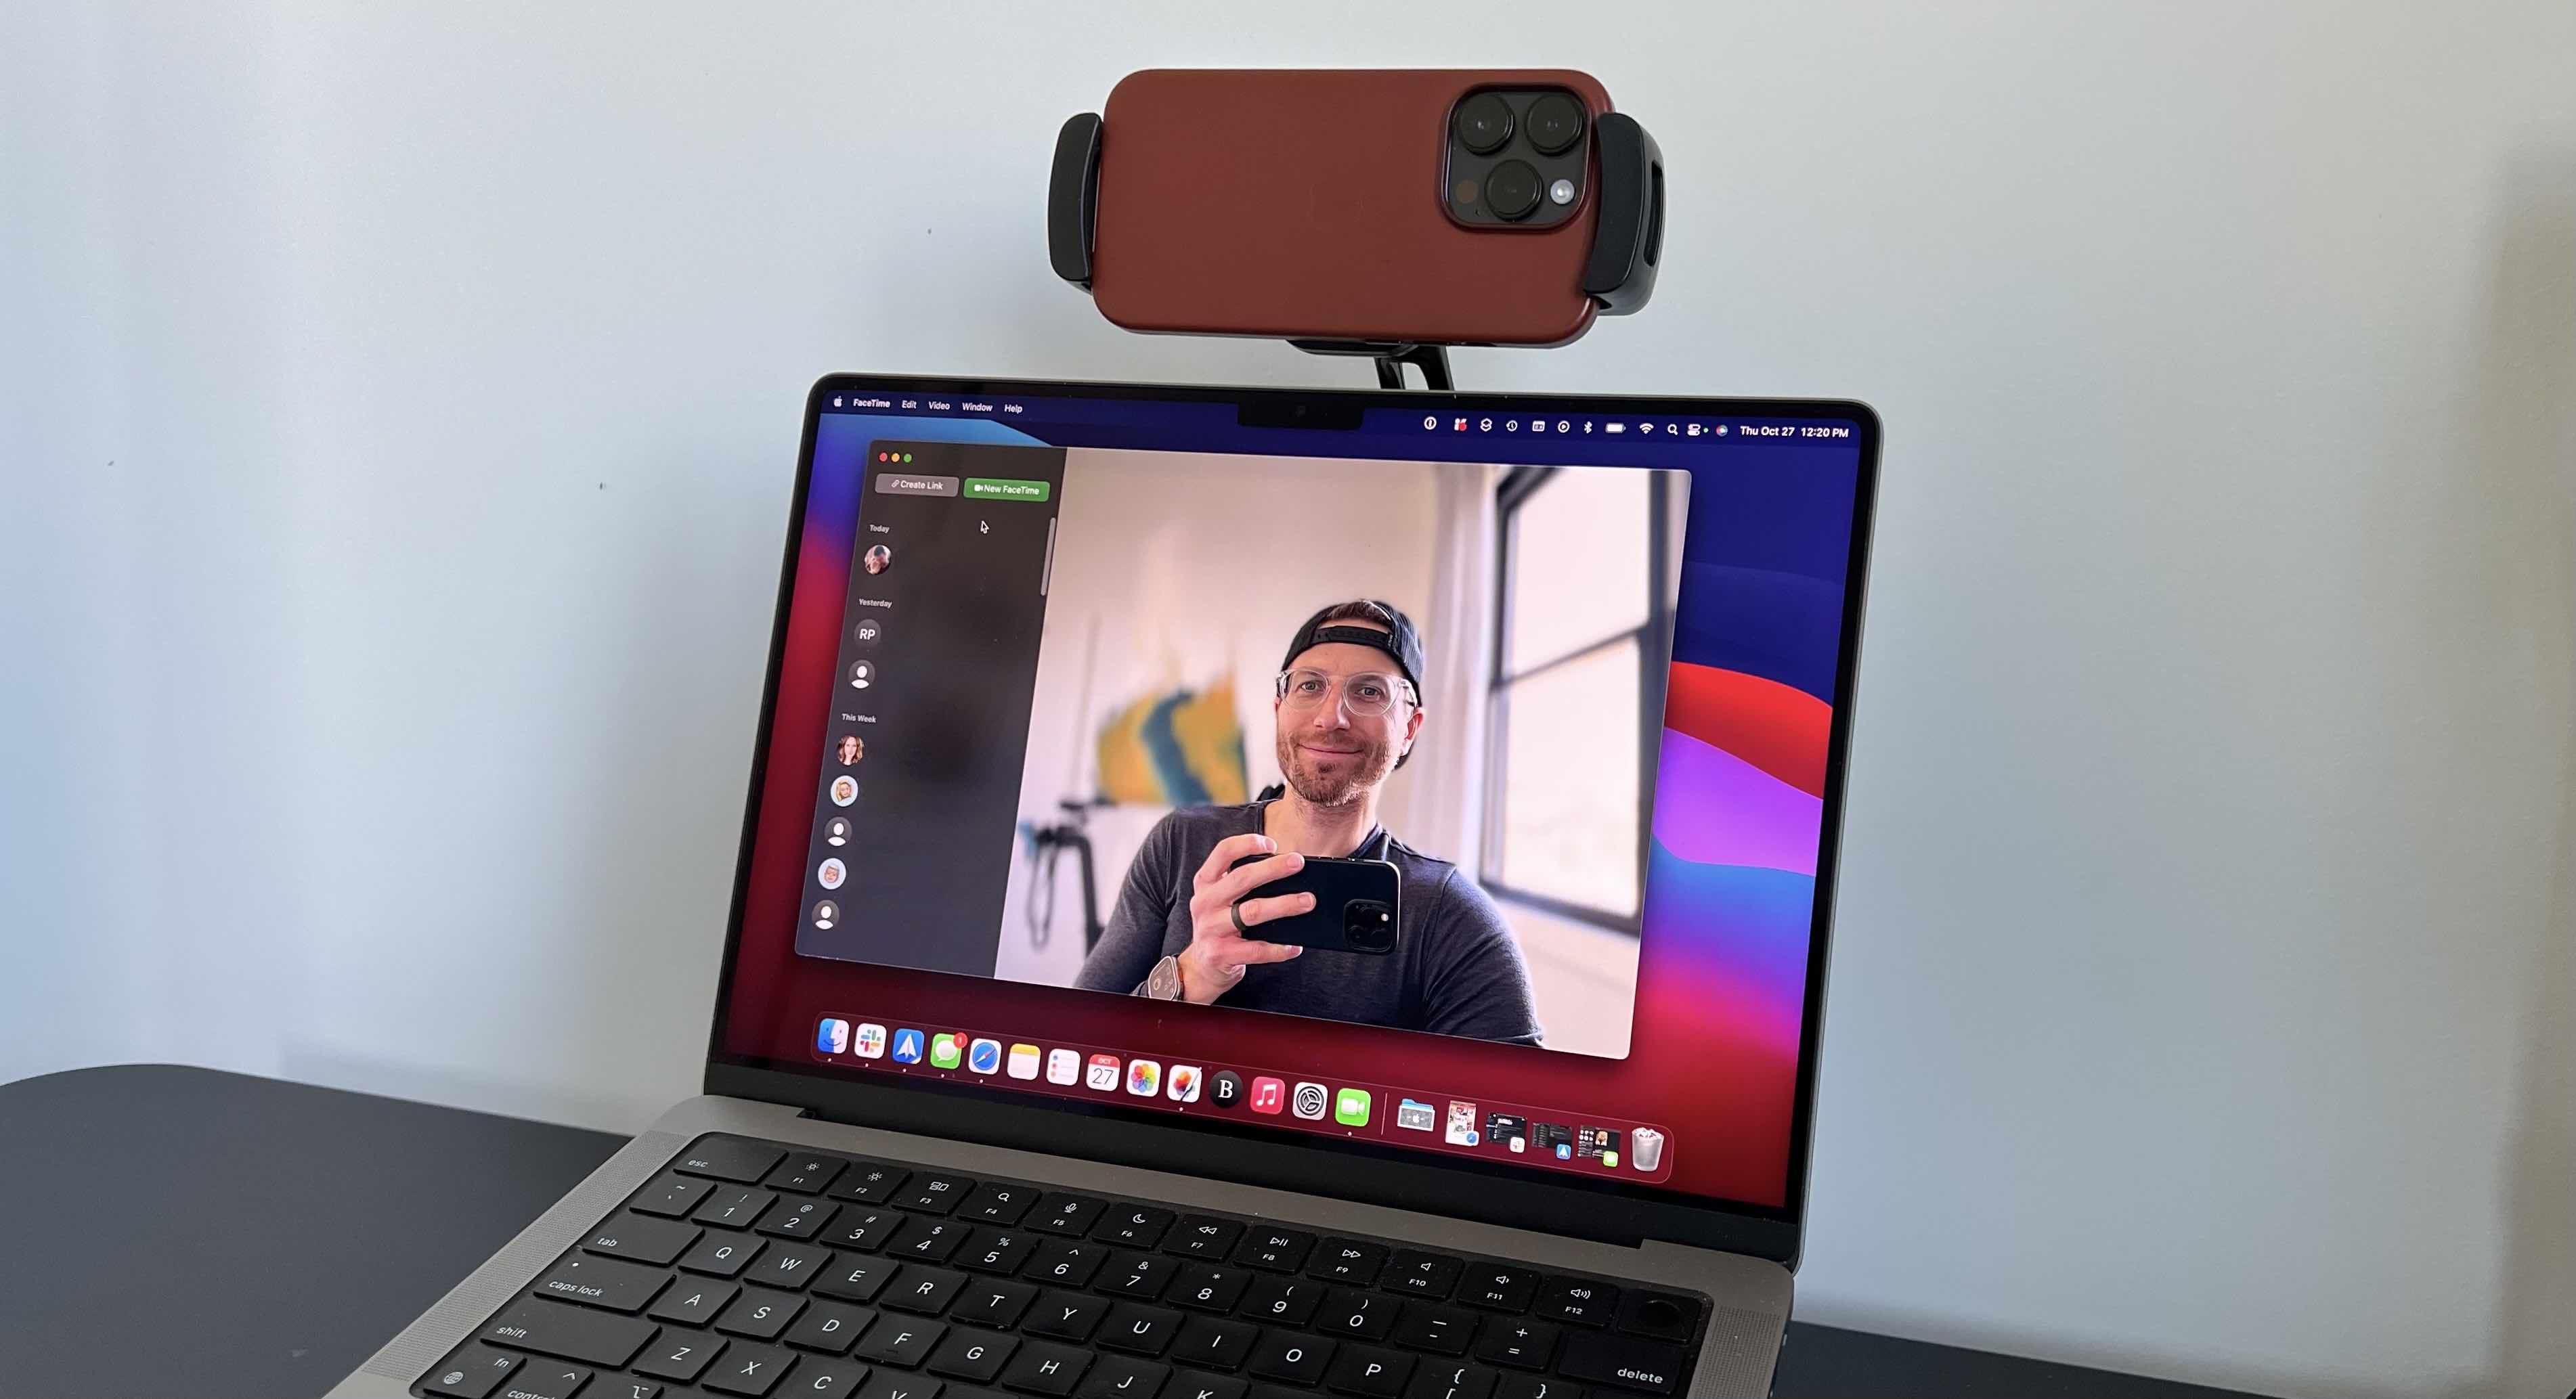 Belkin's iPhone-as-a-Mac-webcam accessory is now available